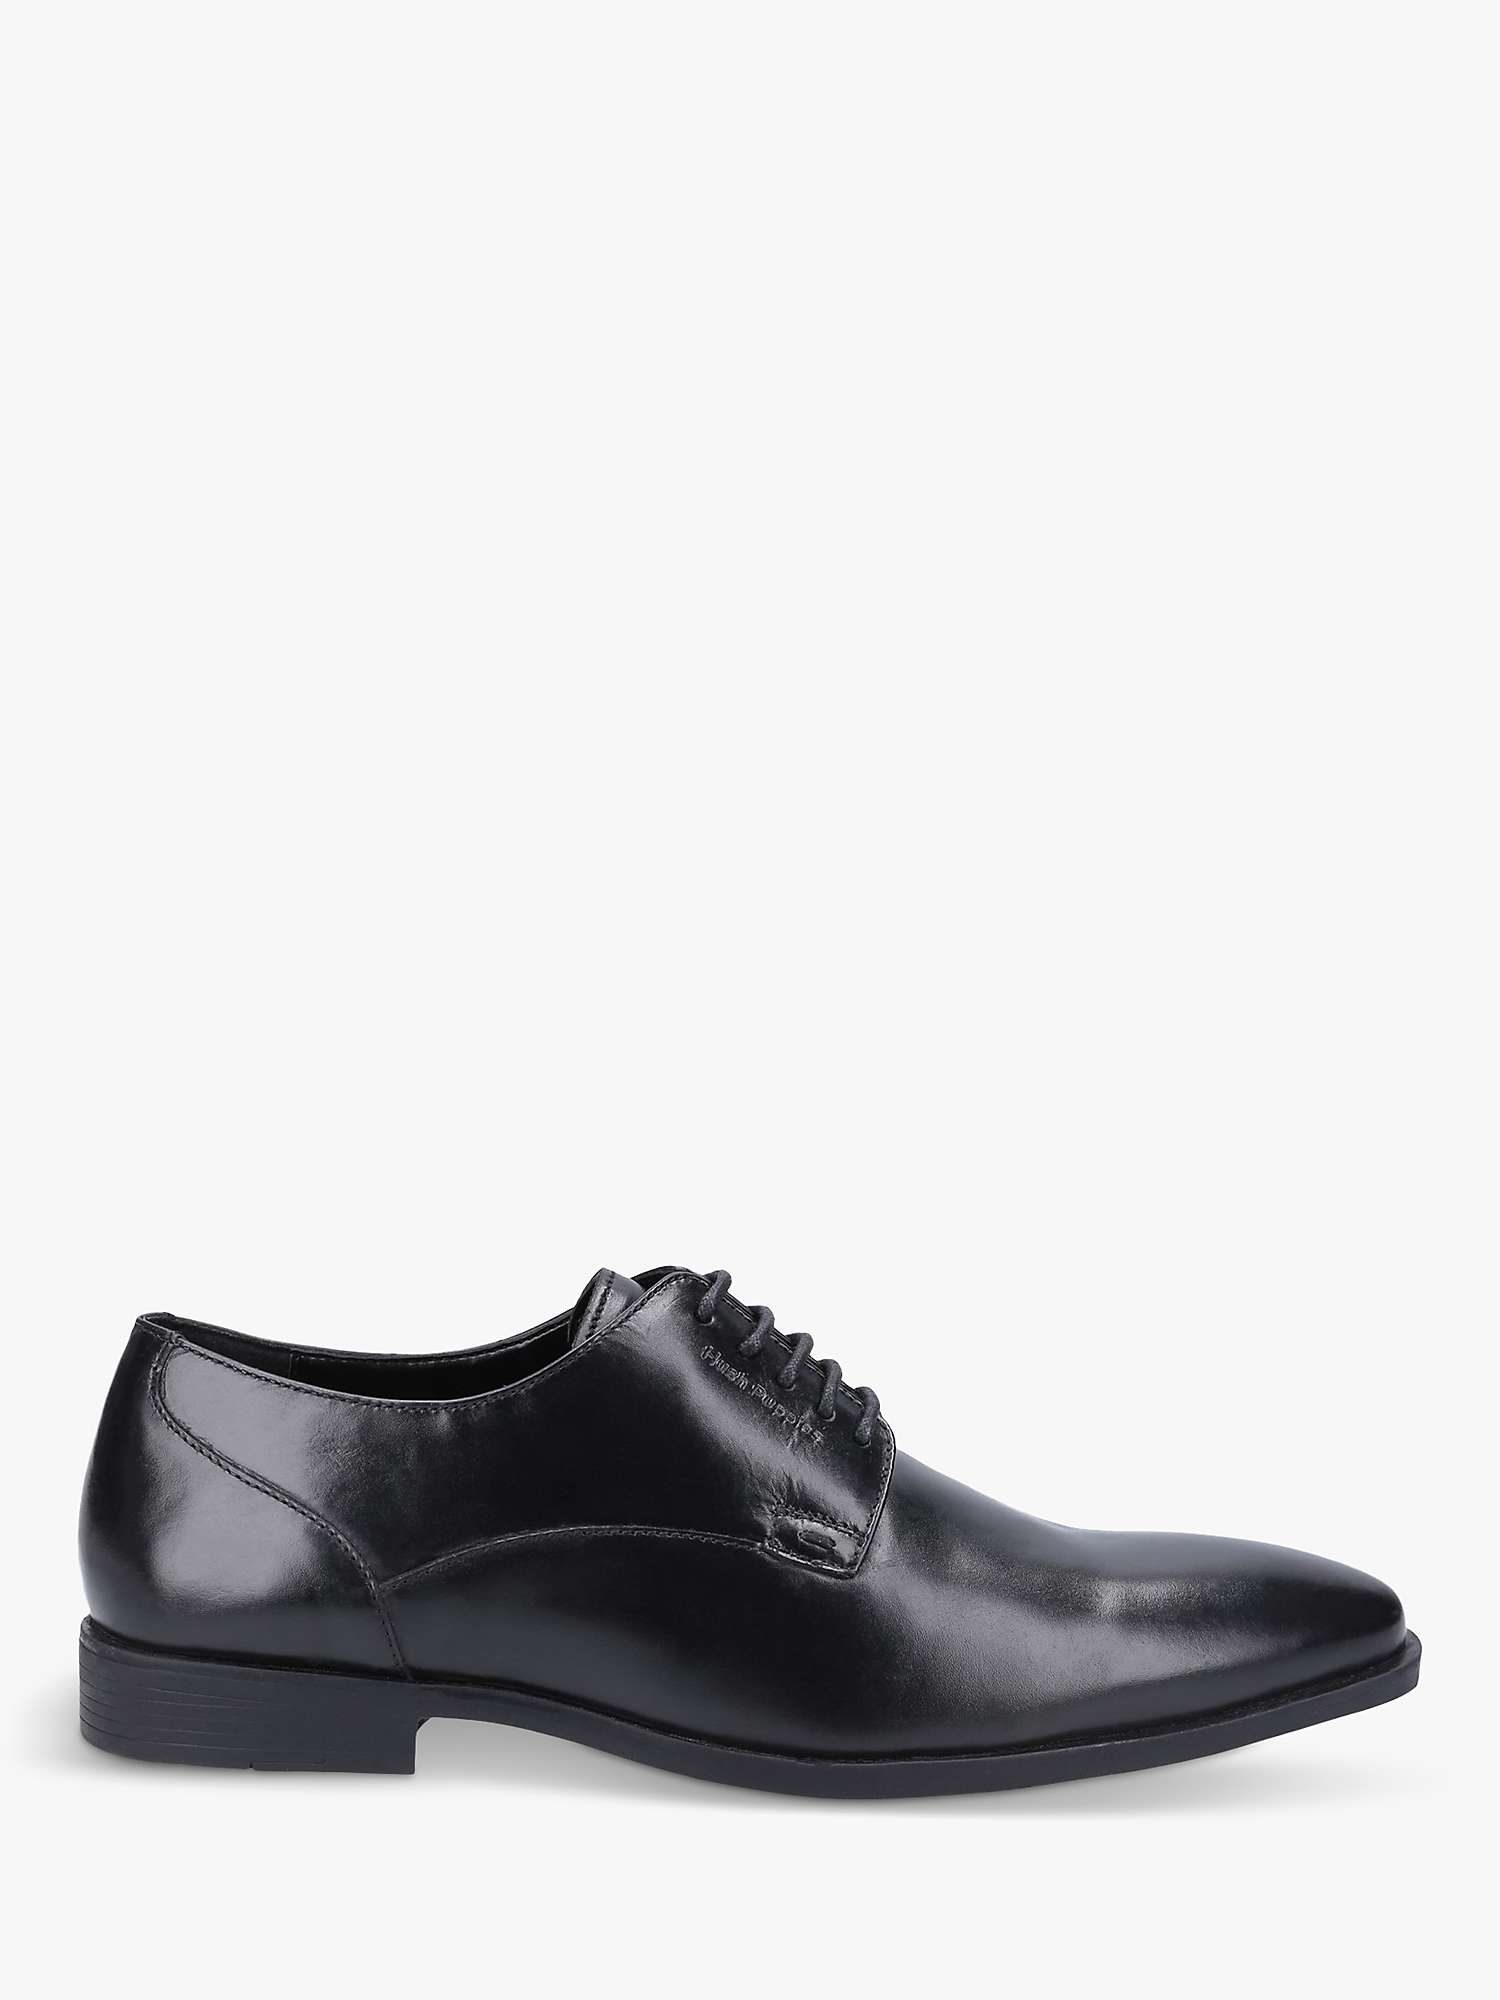 Buy Hush Puppies Ezra Leather Lace Up Shoes, Black Online at johnlewis.com